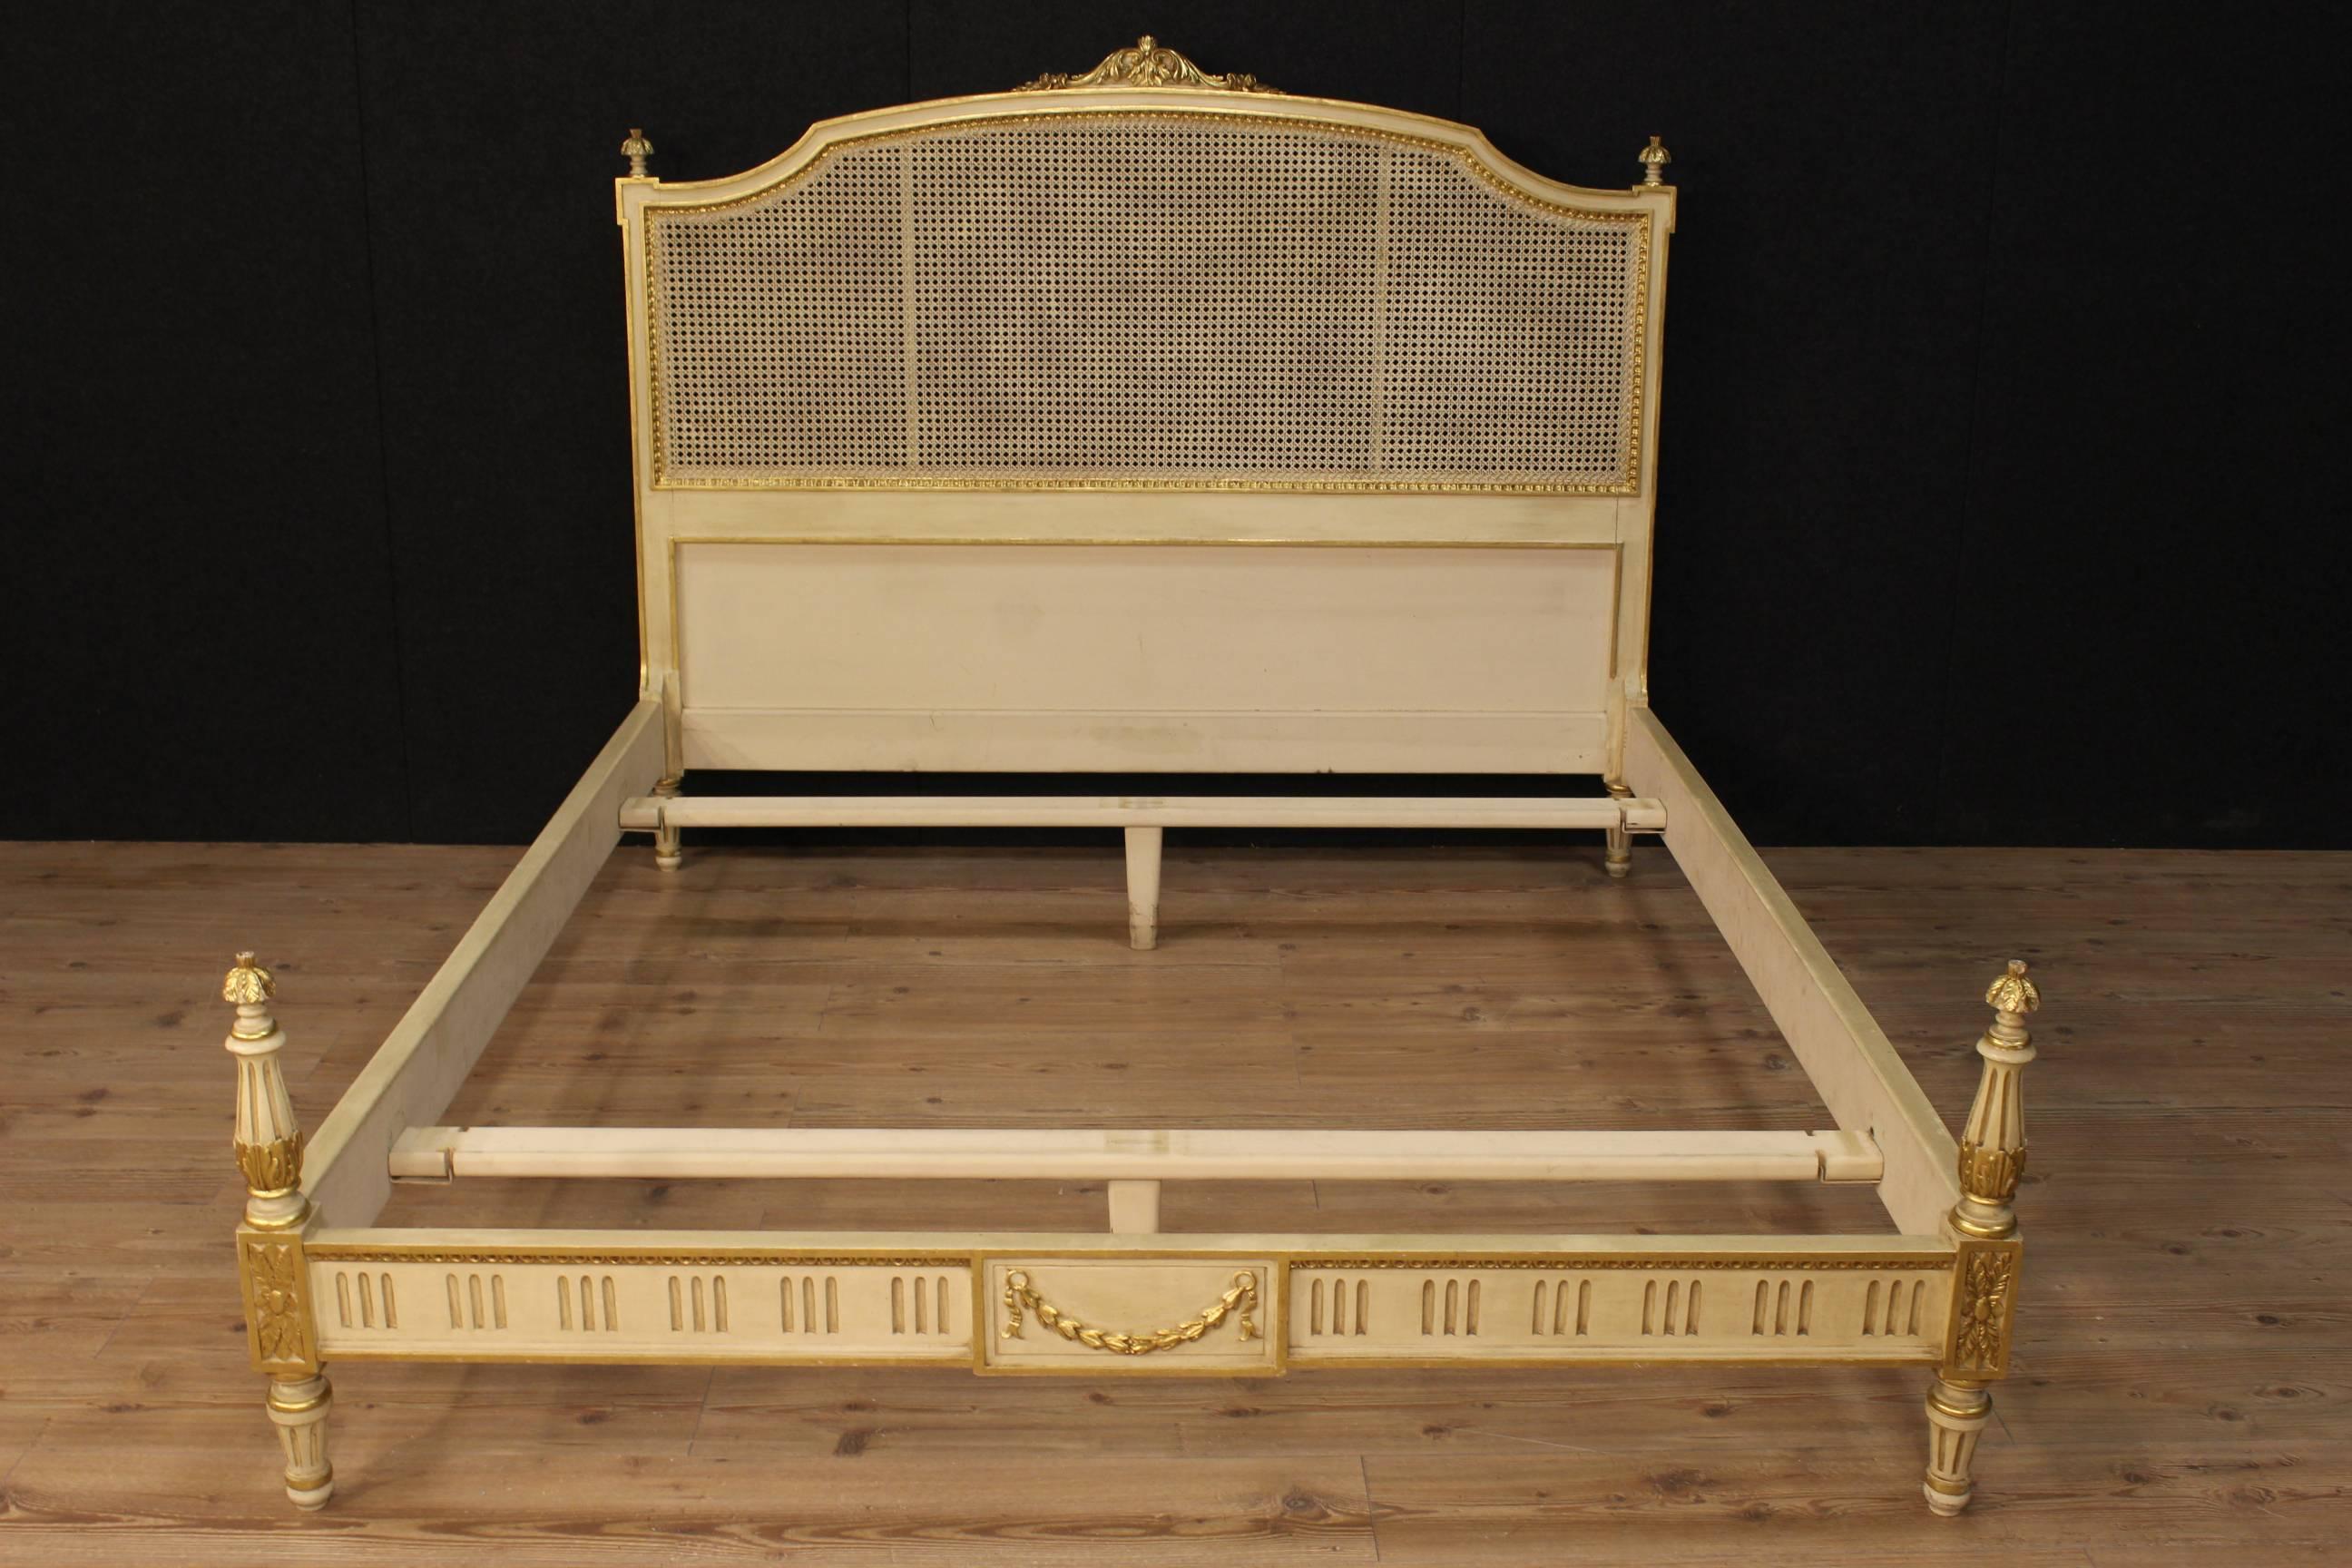 Elegant Italian bed of the 20th century. Furniture made by ornately carved, lacquered and gilded wood in Louis XVI style of great taste and beautiful decoration. Double bed of great extent and impact with headboard decorated with cane in perfect